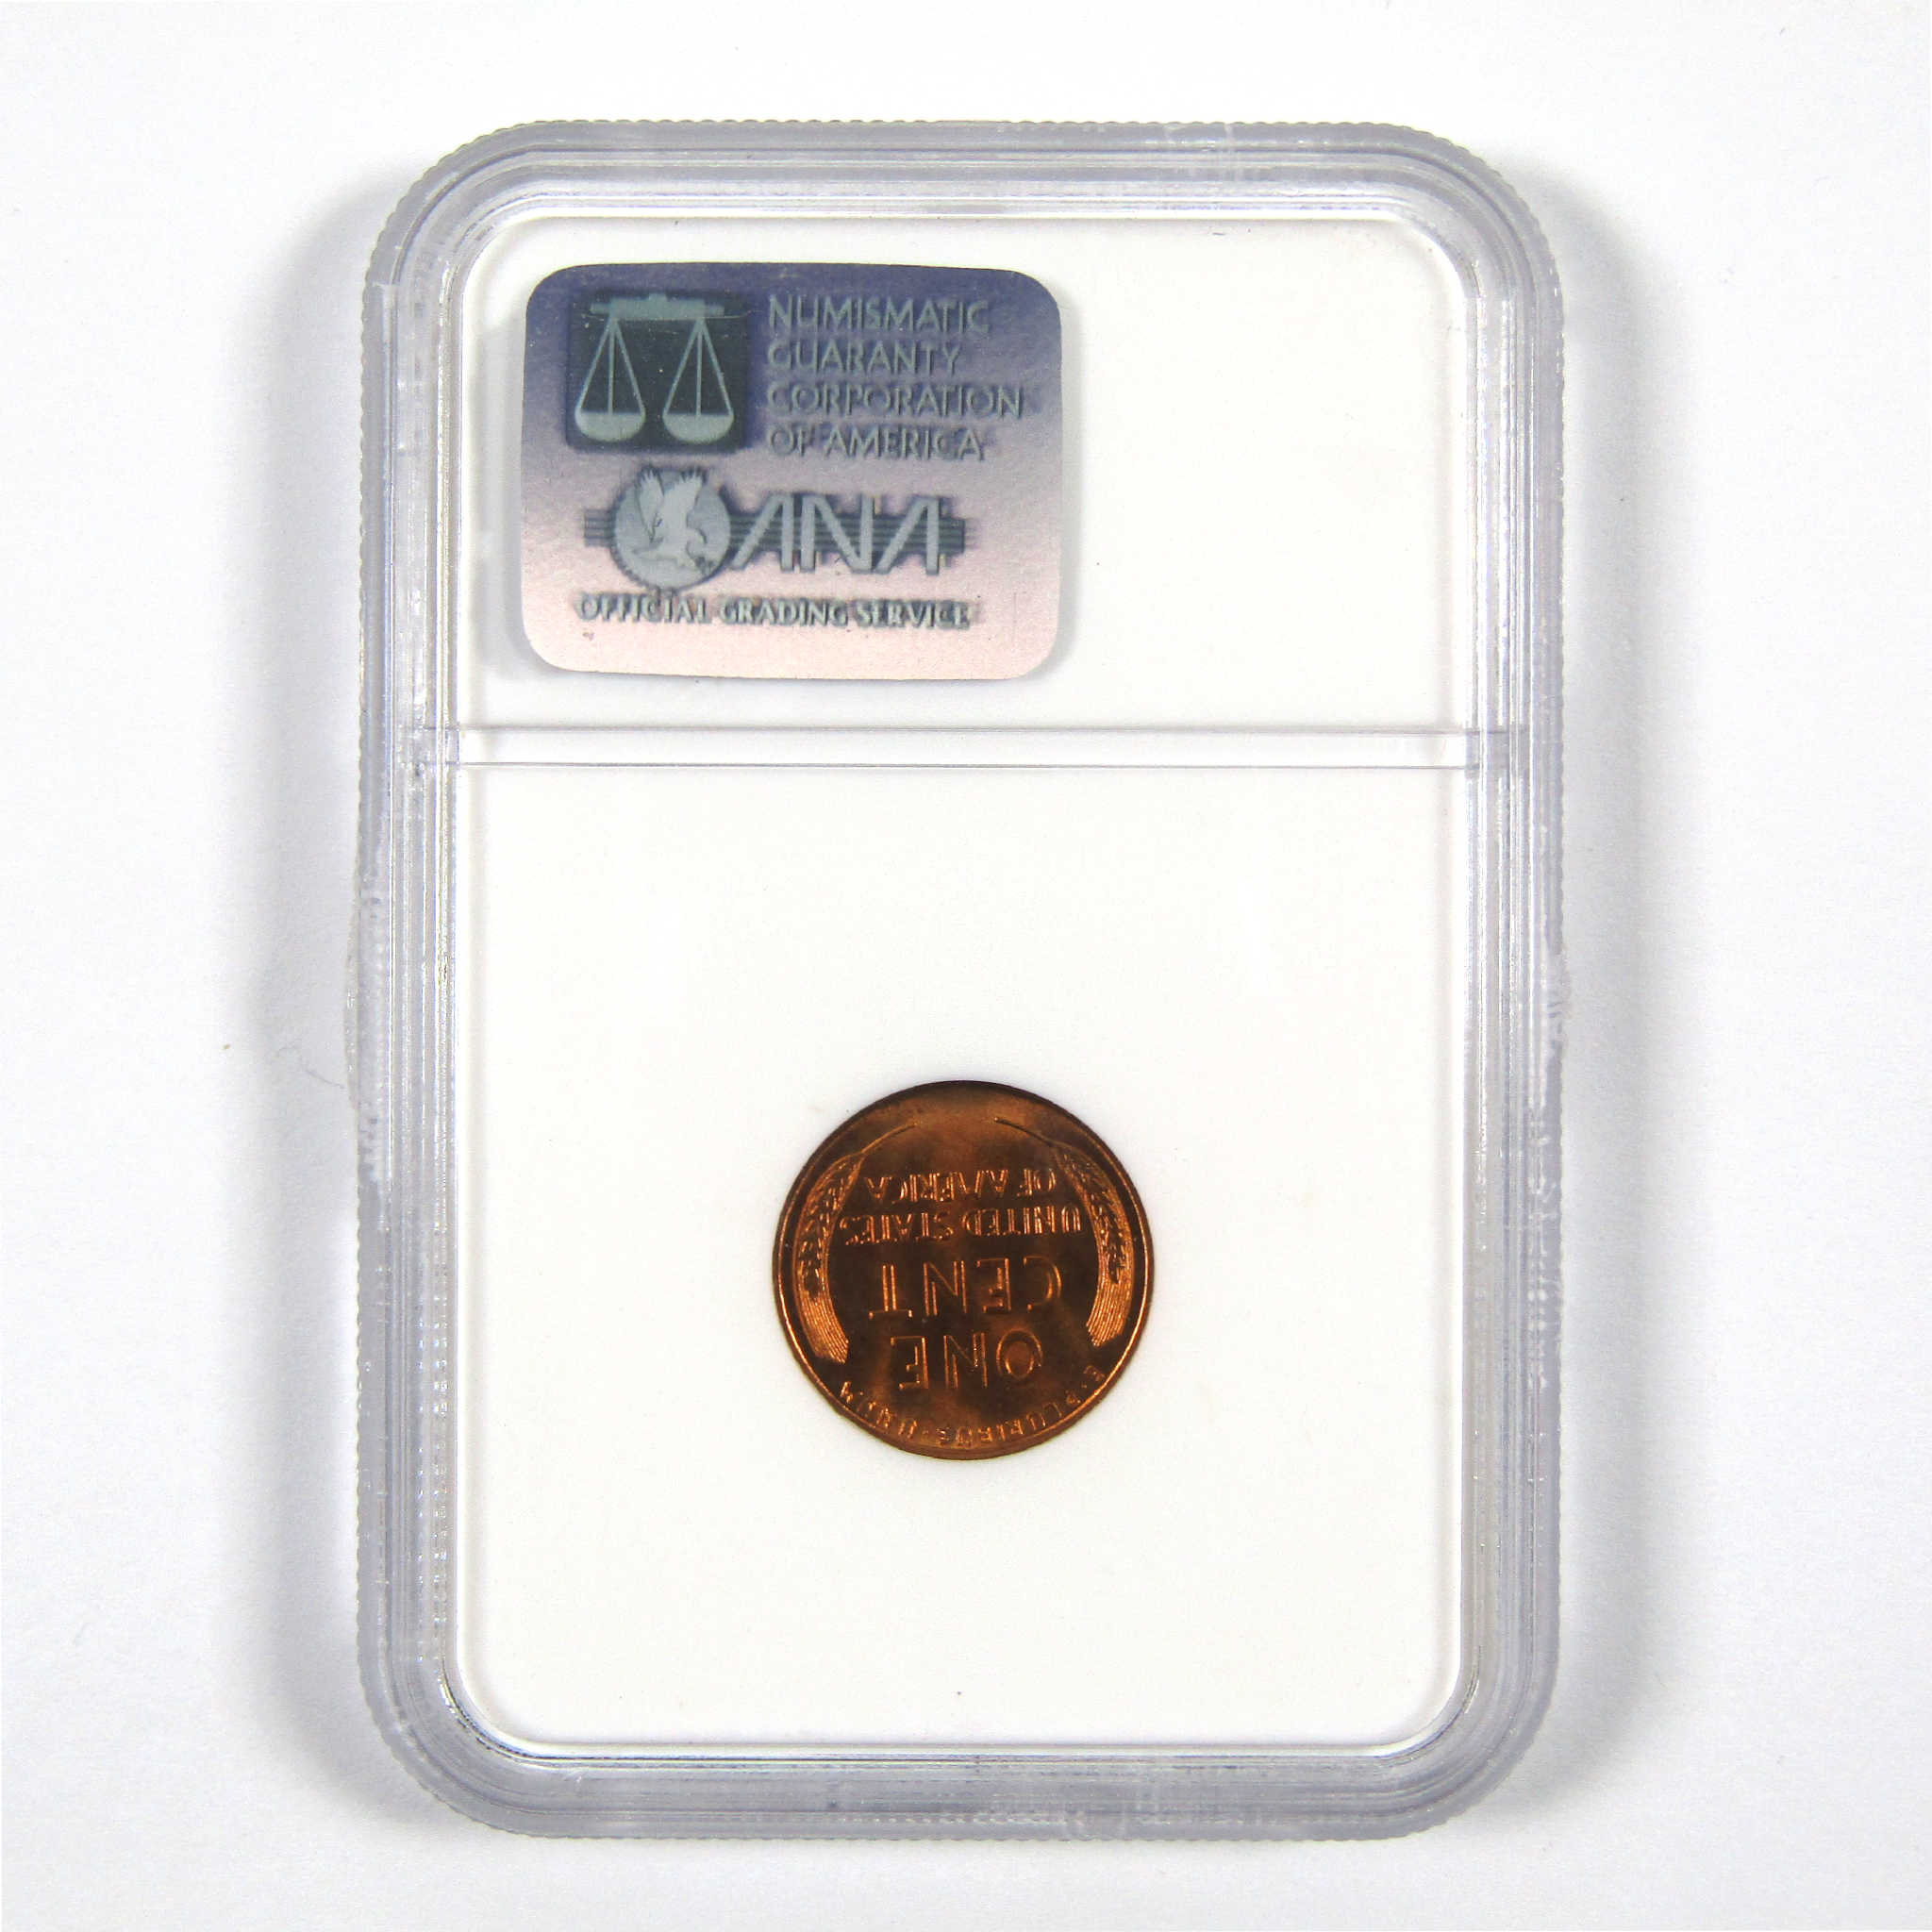 1946 D Lincoln Wheat Cent MS 67 RD NGC Penny 1c Unc SKU:CPC4059